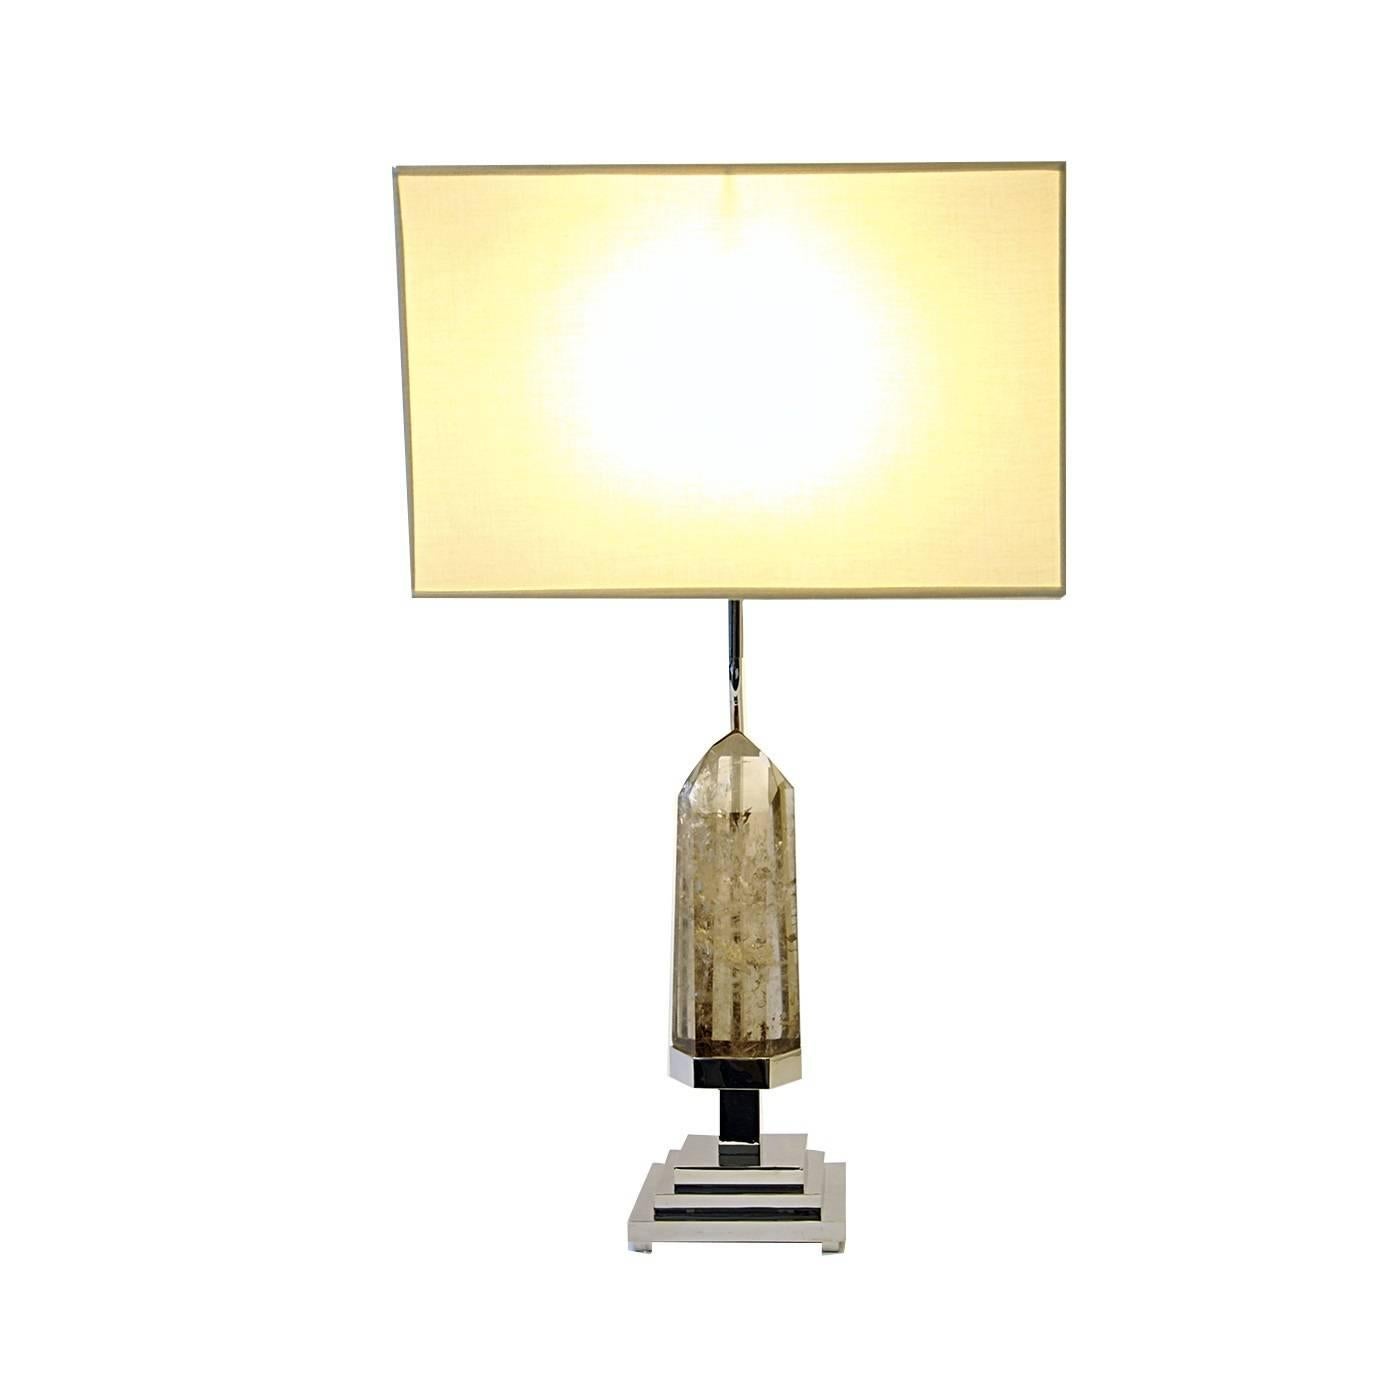 This lamp is perfect for adorning a living room, bedroom or even a sophisticated office environment. An irregularly hand-cut piece of light Smokey Quarts is Elevated on a pyramid like structure in nickel plated brass which was meticulously